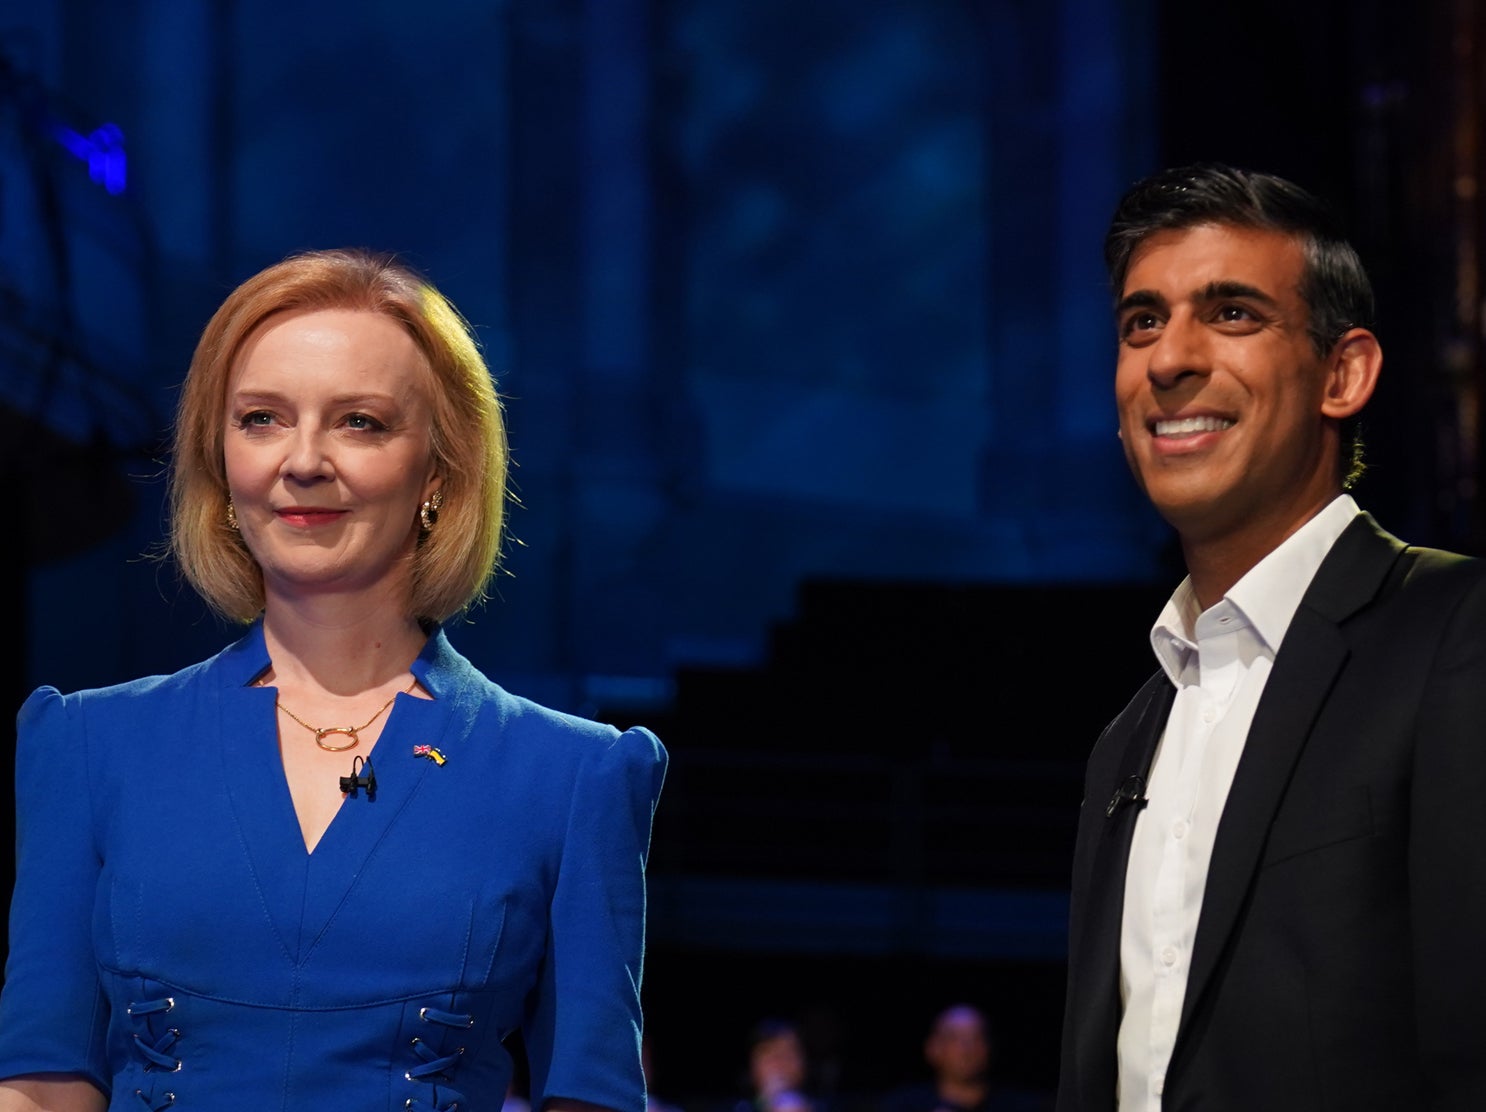 Rishi Sunak and Liz Truss are going head to head for the Tory leadership